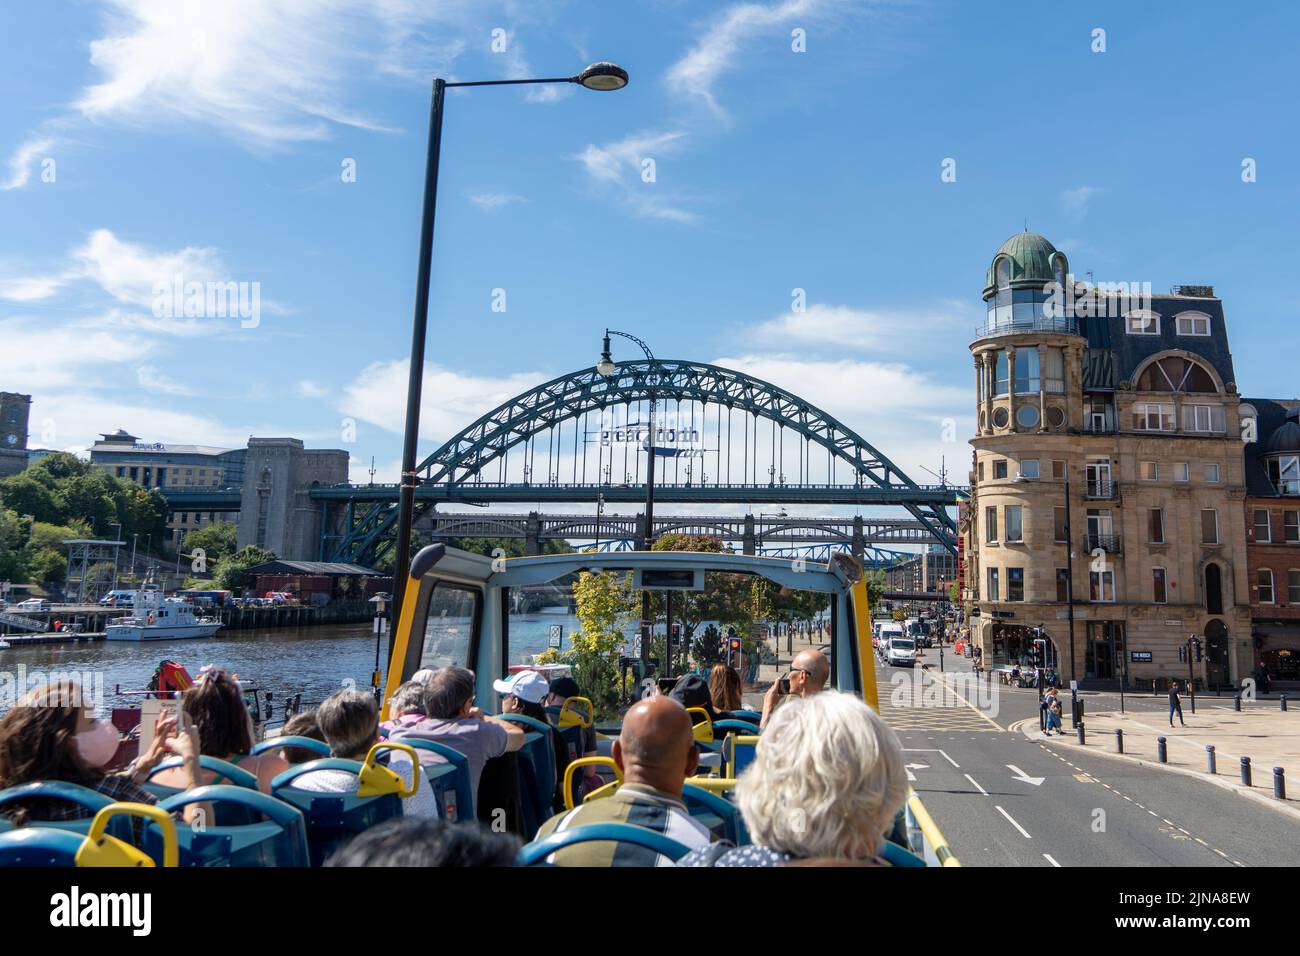 Travelling around the city of Newcastle upon Tyne, UK on the open top Toon Tour sightseeing bus, on a sunny day. Stock Photo